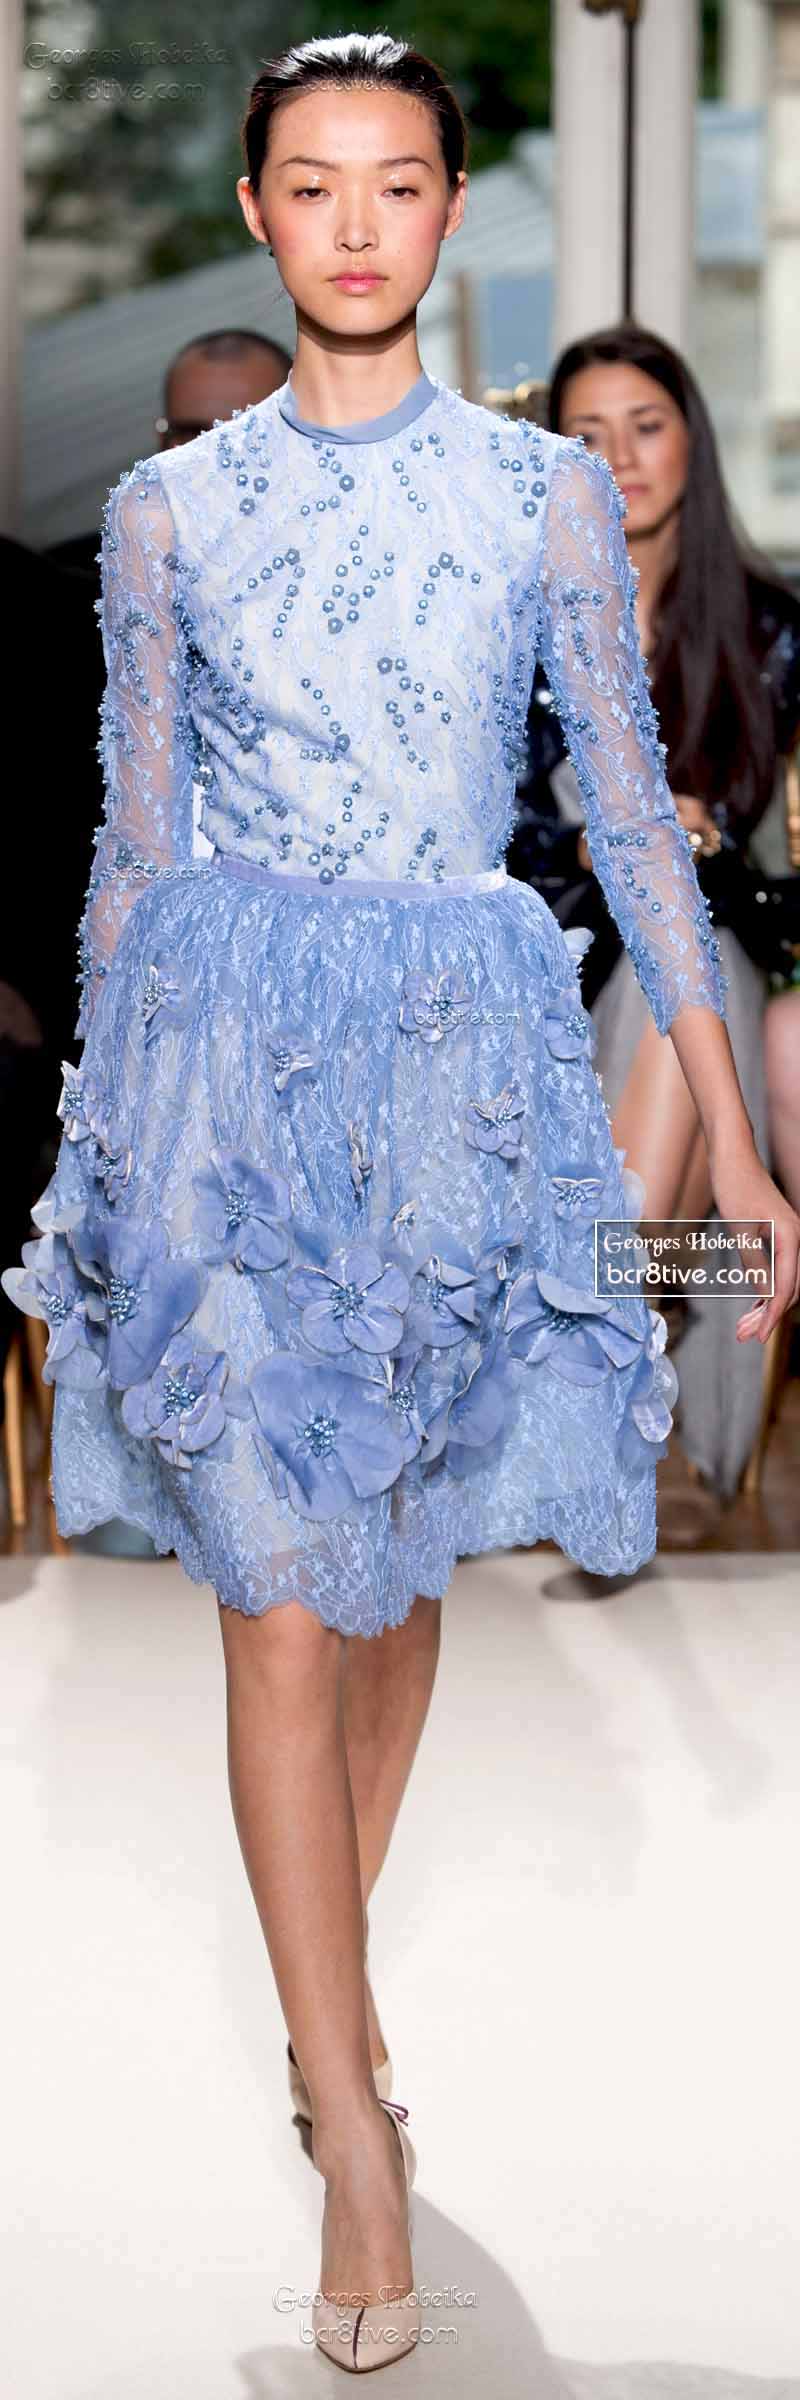 Georges Hobeika Fairy Tales – Page 3 – Be Creative